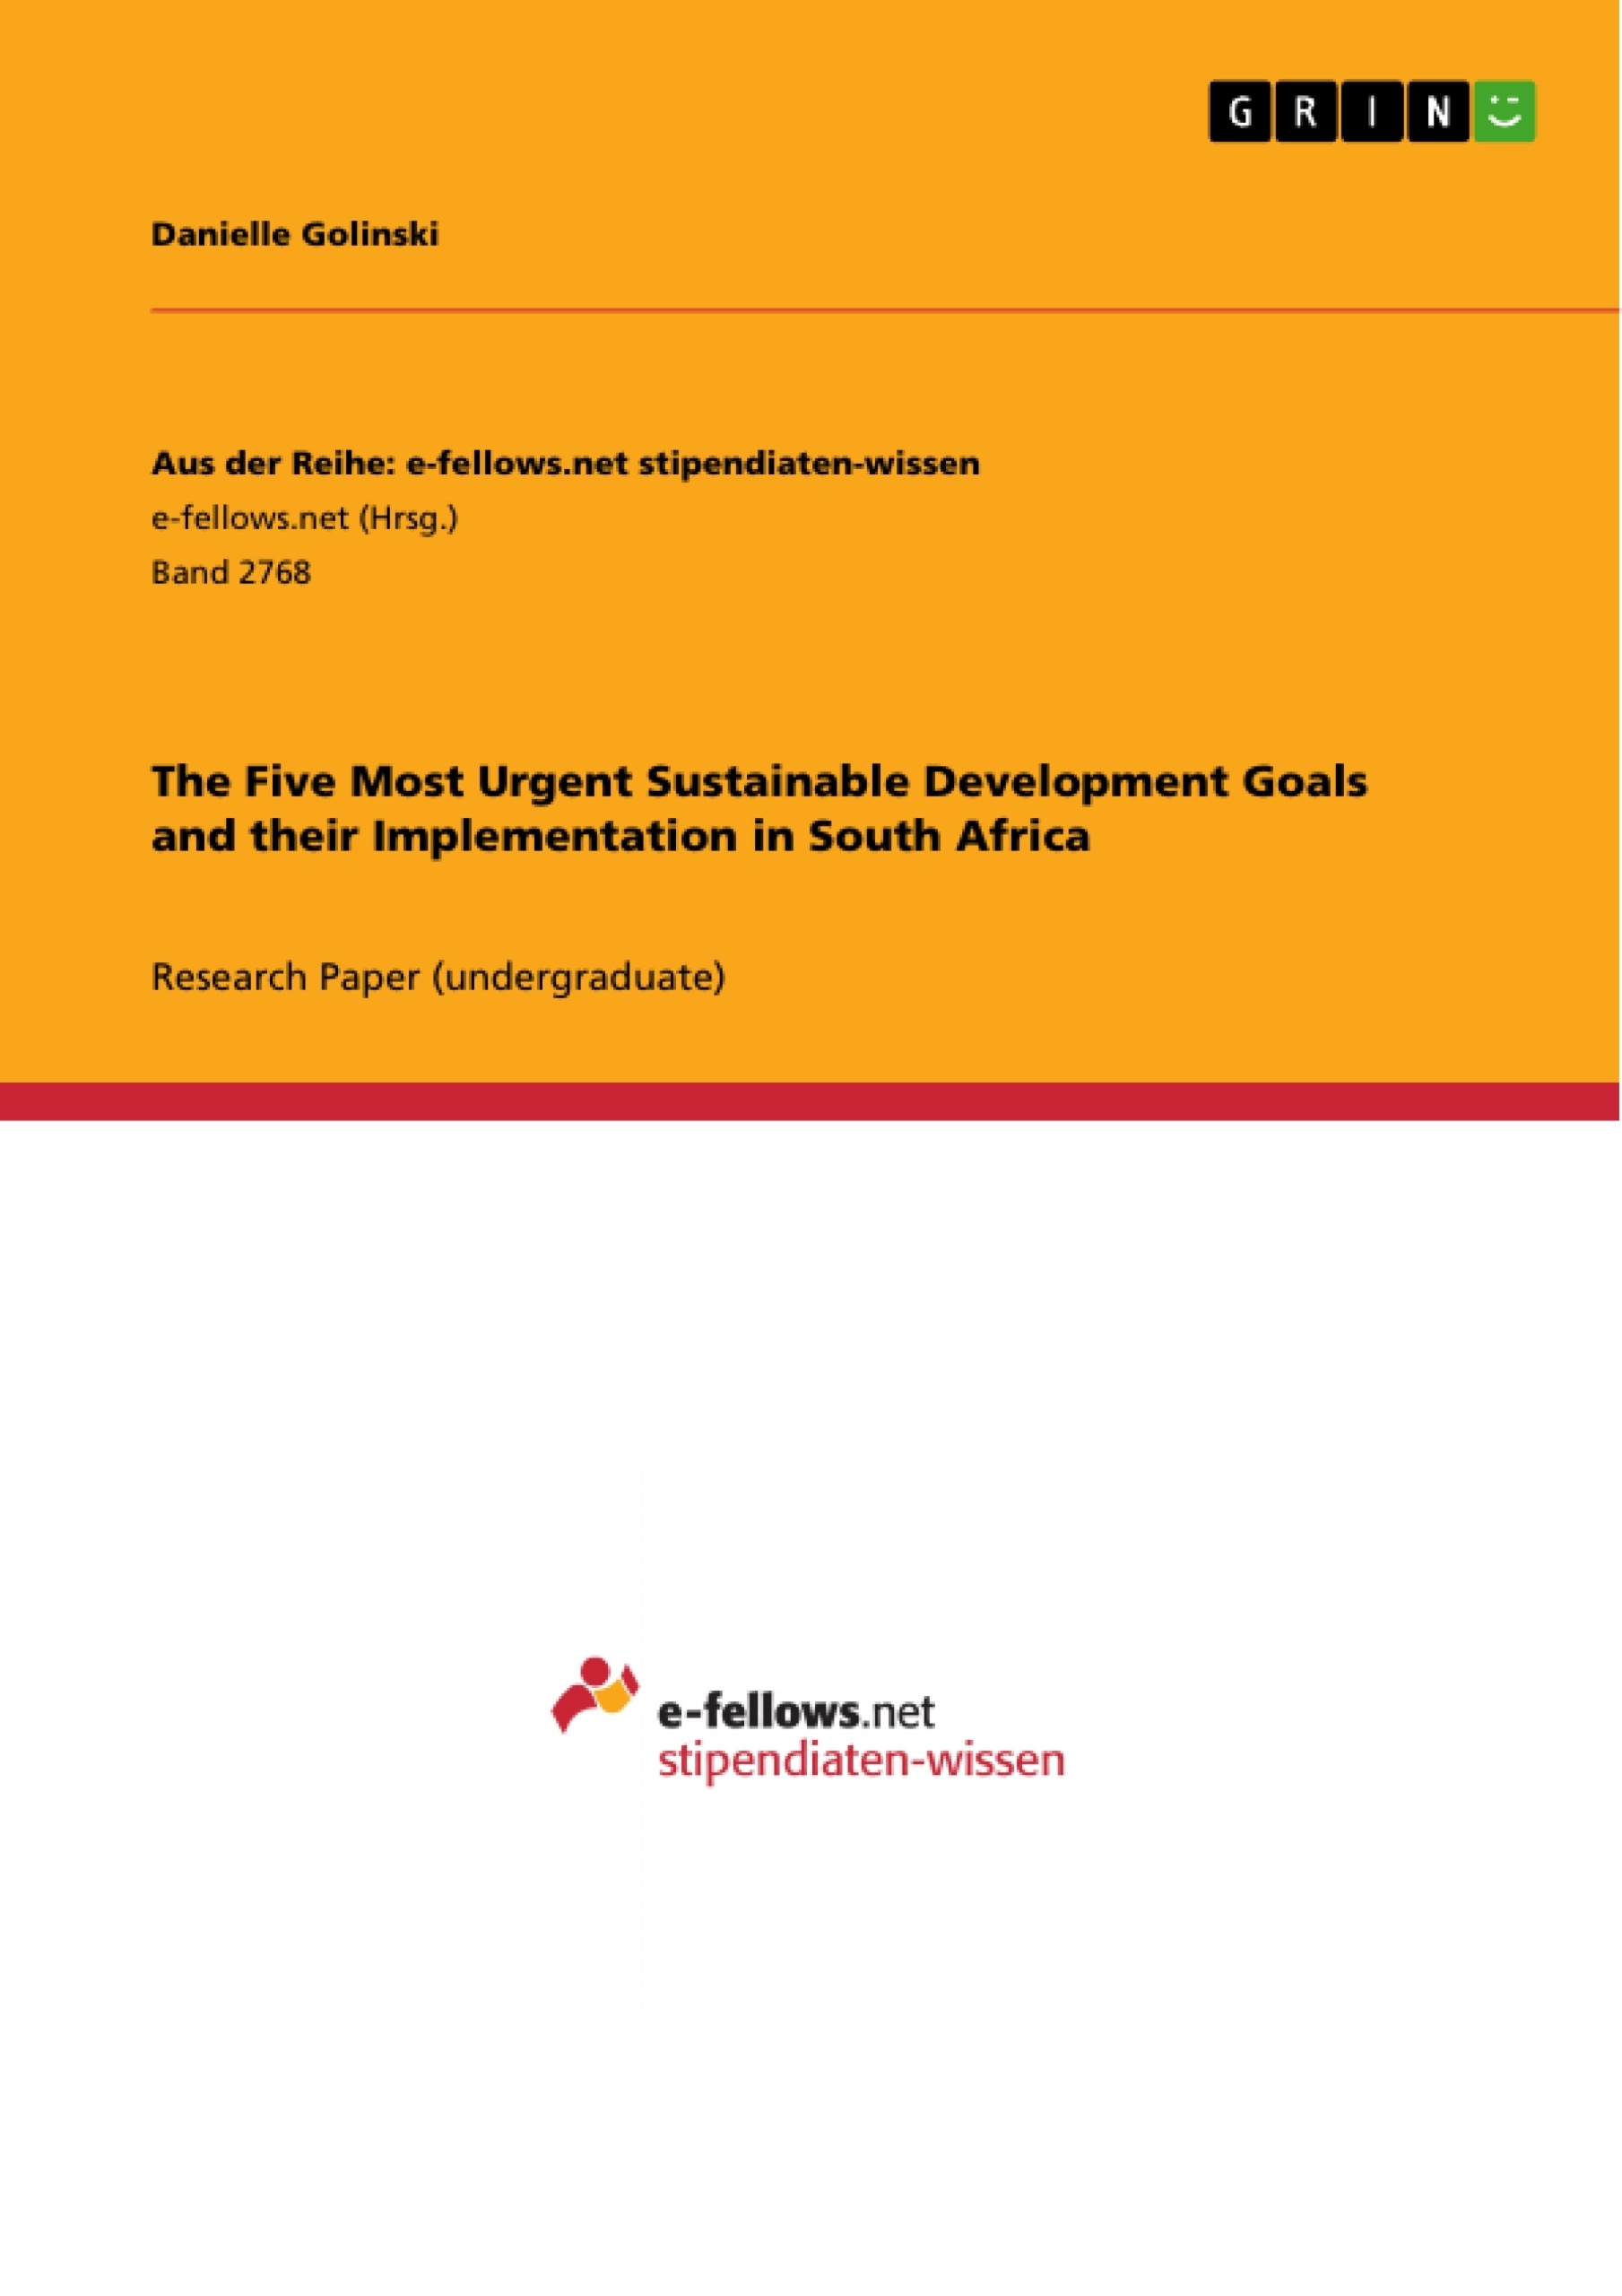 Title: The Five Most Urgent Sustainable Development Goals and their Implementation in South Africa